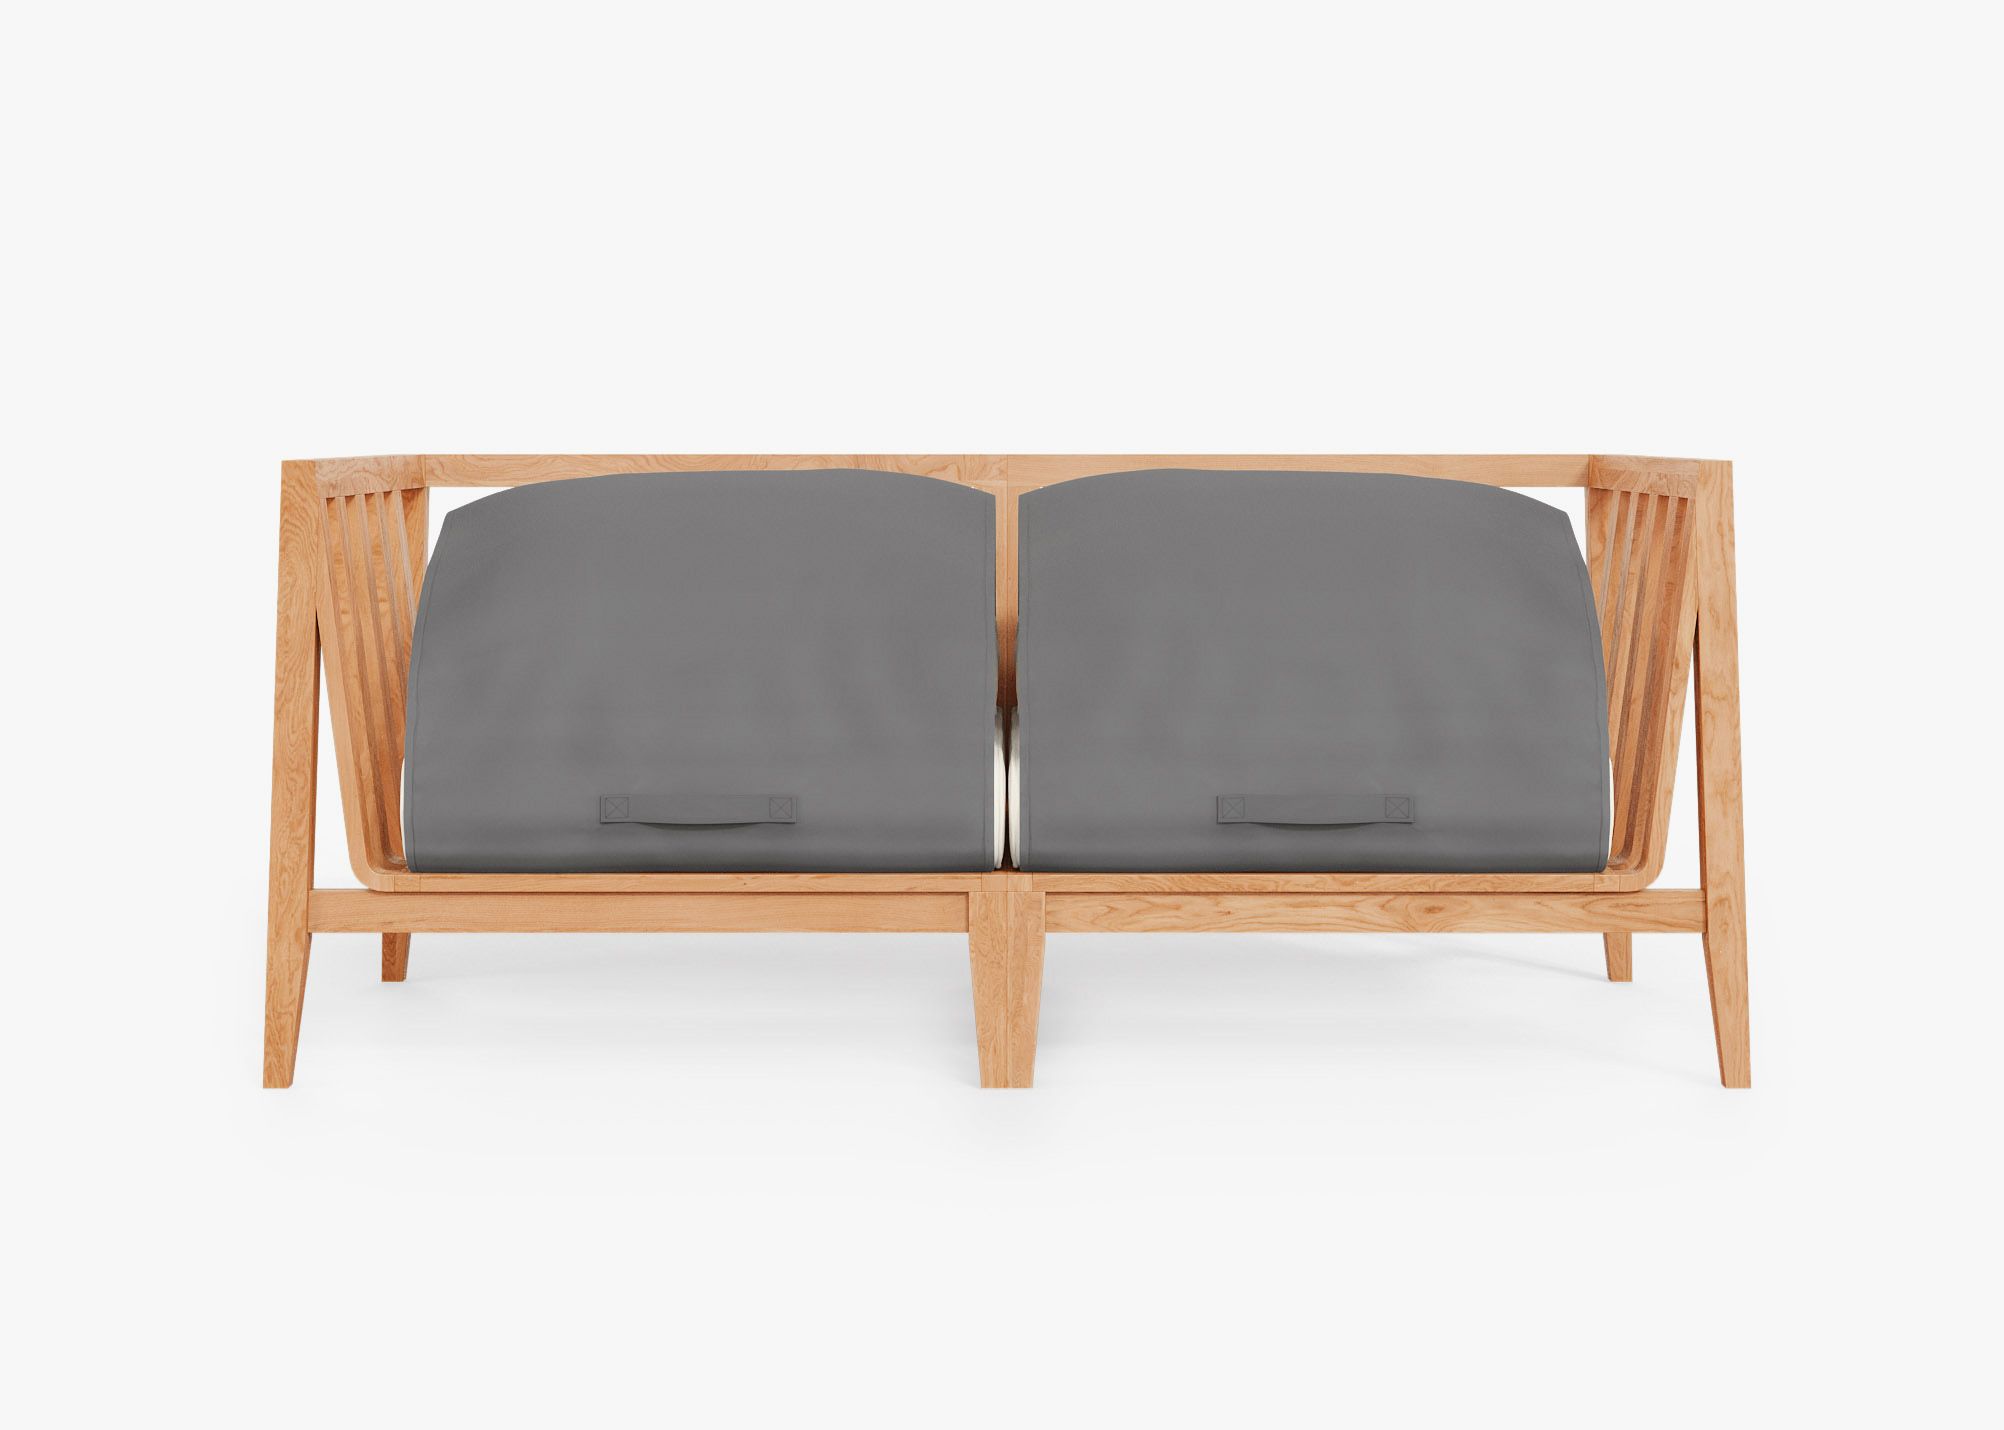 Teak Outdoor Loveseat shown with the OuterShell outdoor cushion cover, offering exclusive integrated protection.